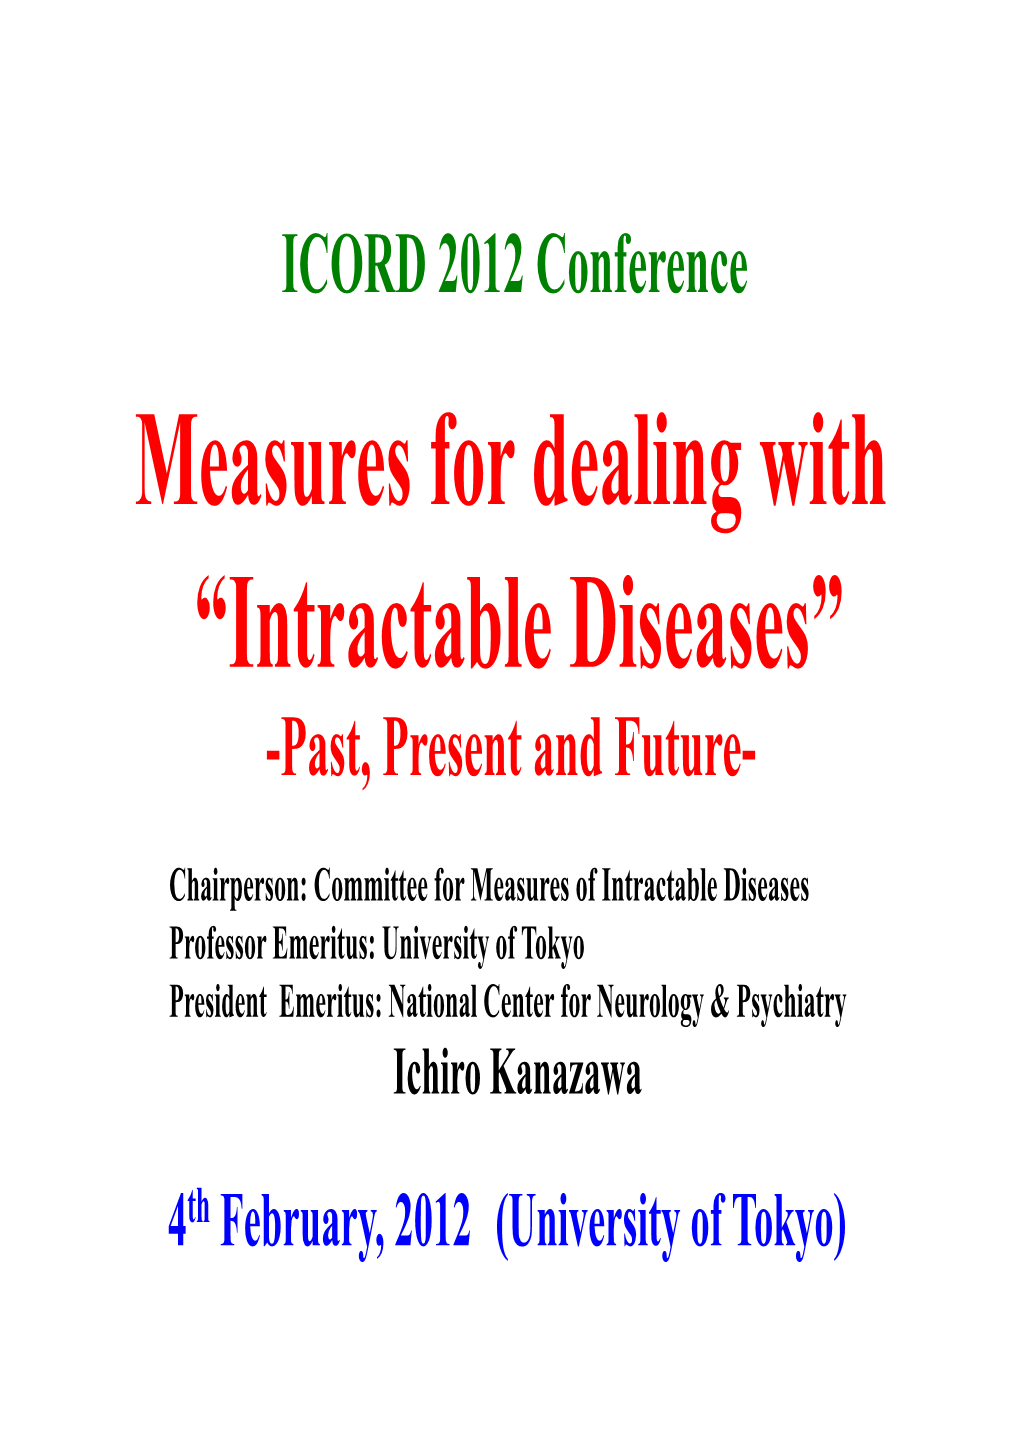 Intractable Diseases” -Past, Present and Future